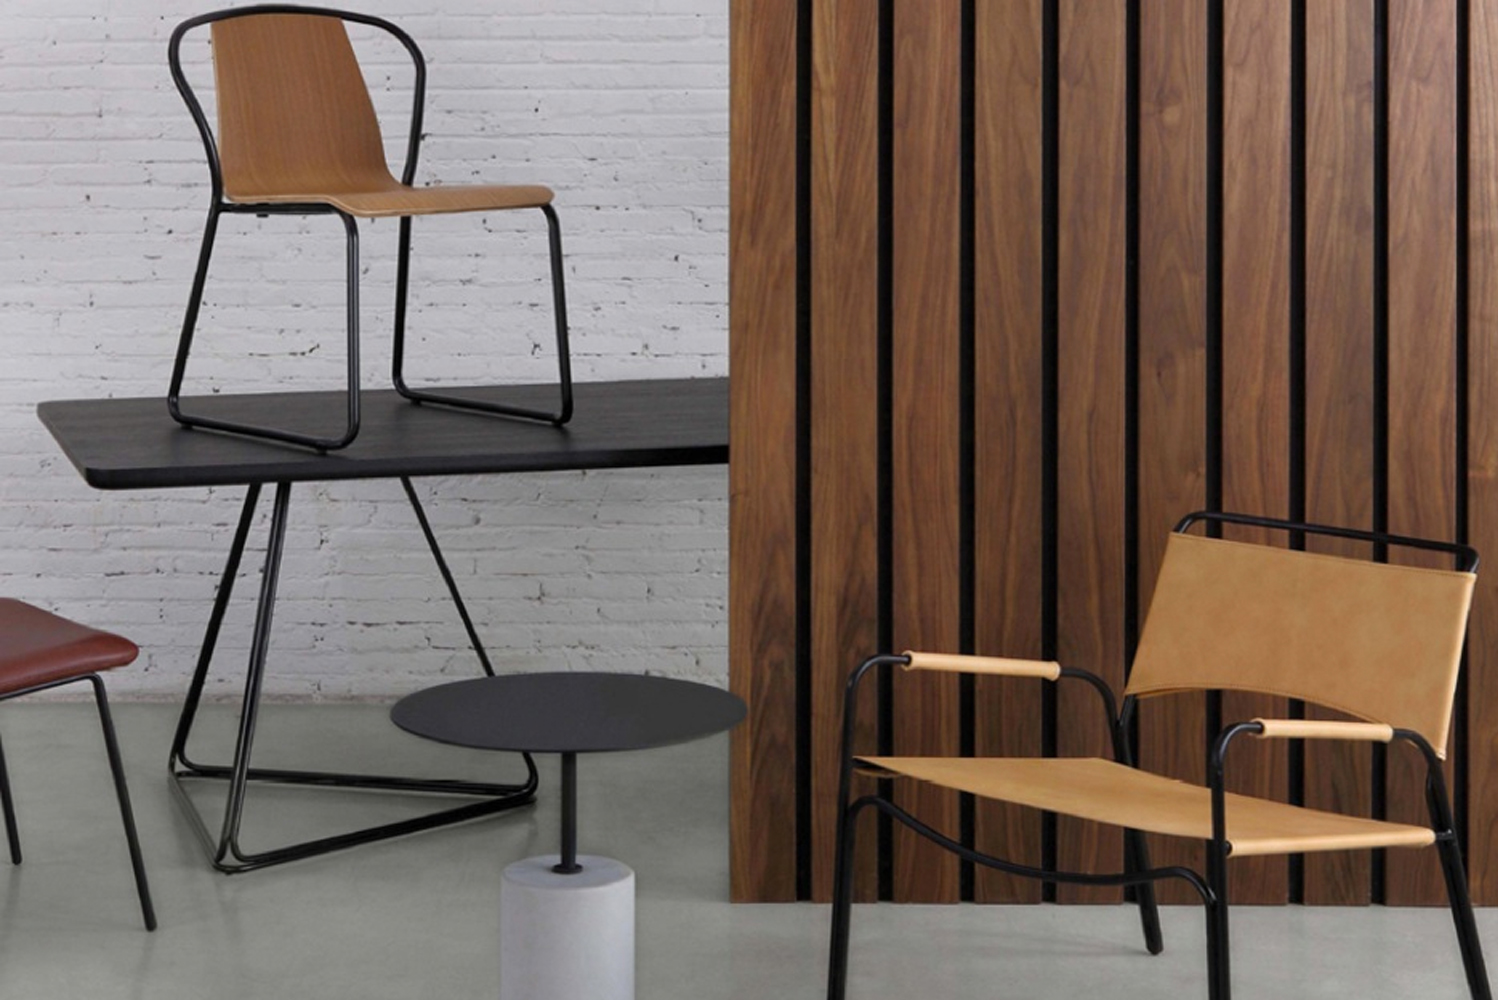 mad design has launched two new chairs Sling and Trace